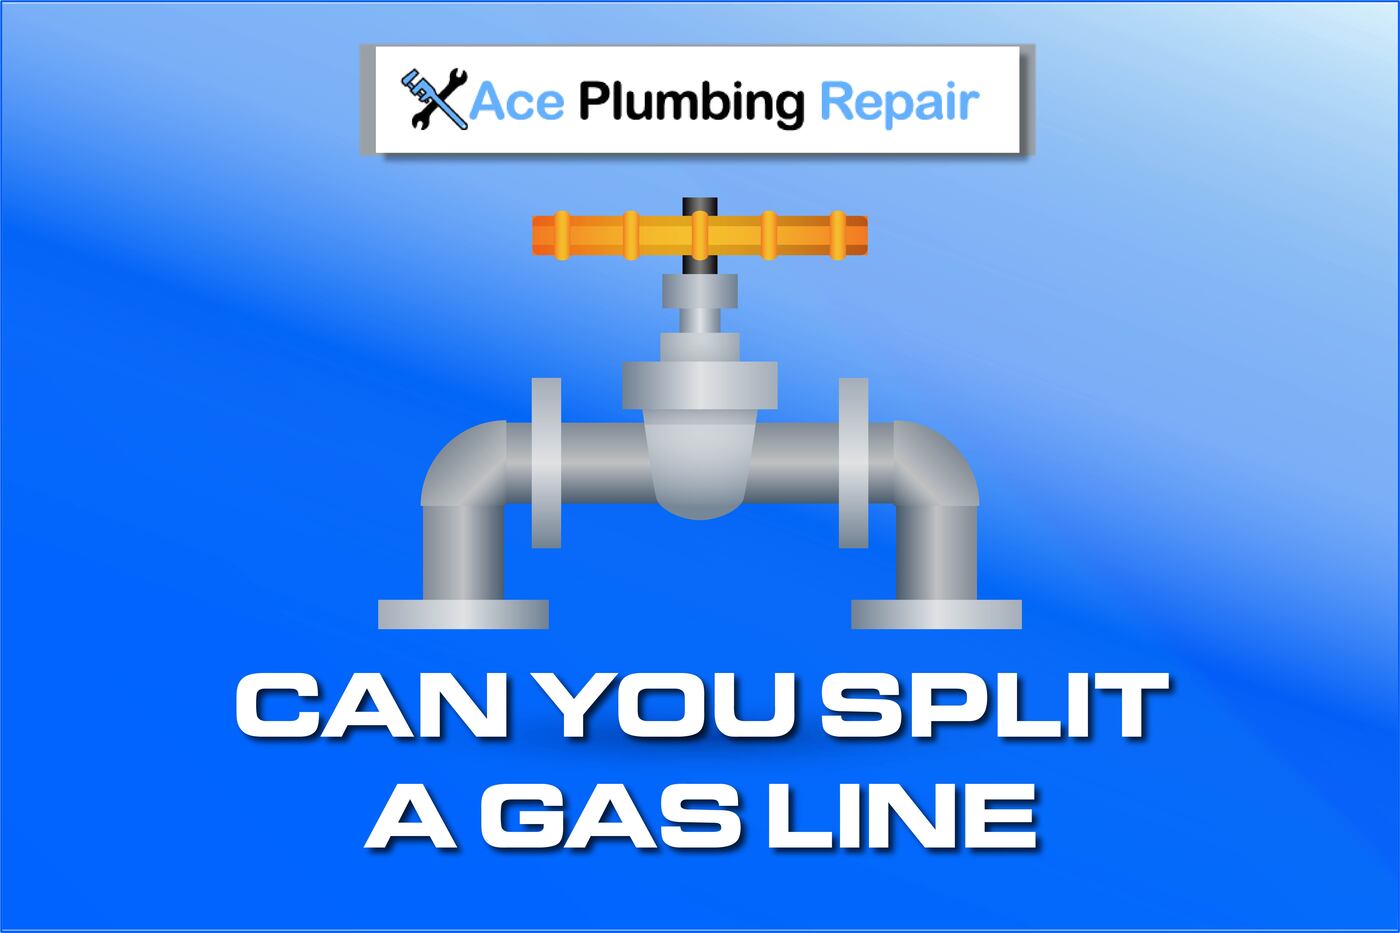 Can you split a gas line?